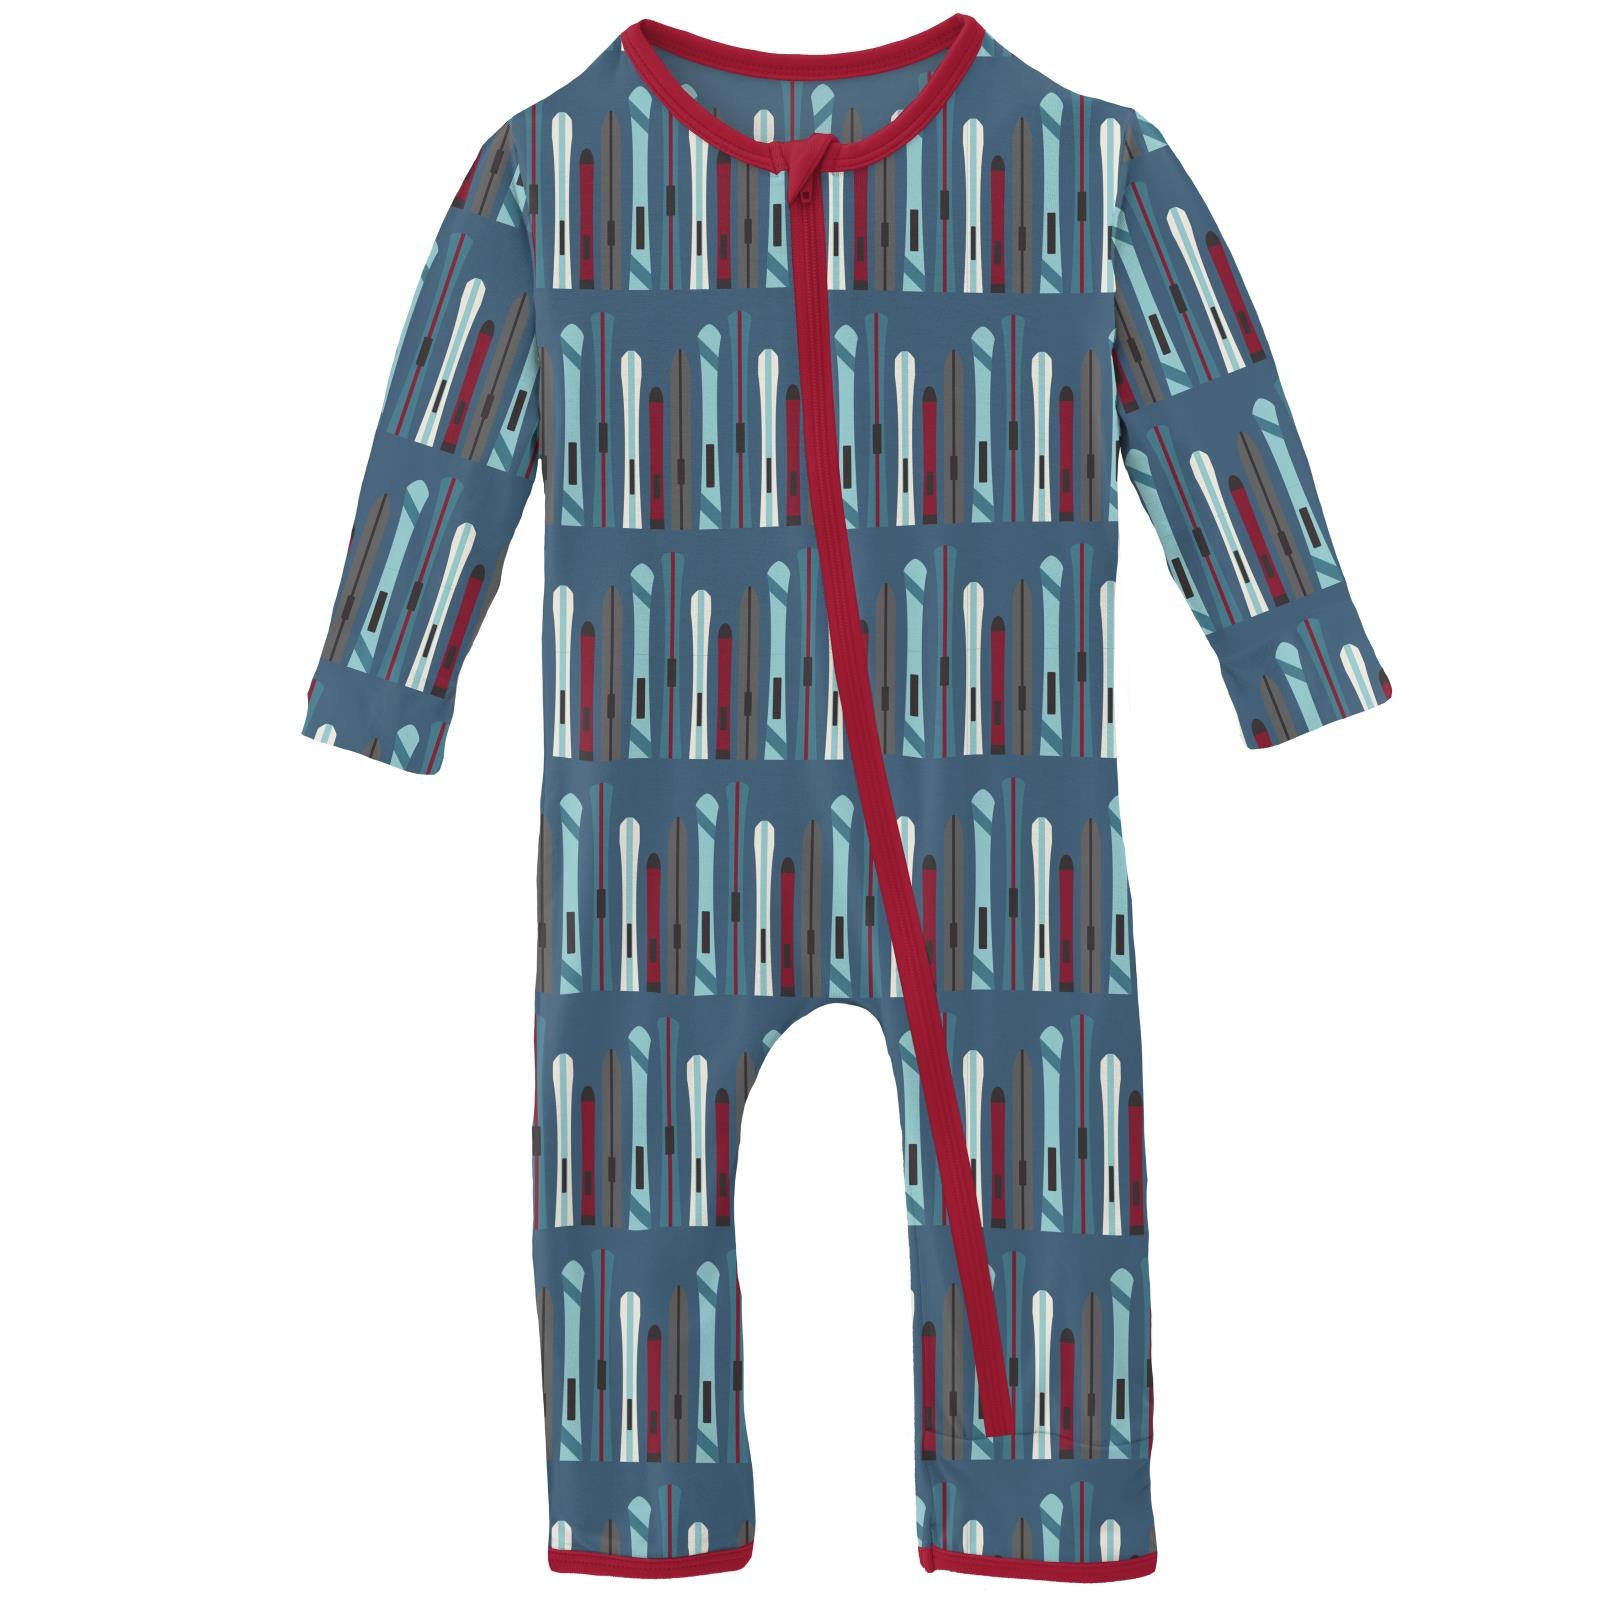 Kickee Pants Infant Girl Natural Camper Coverall 6-9 Months New